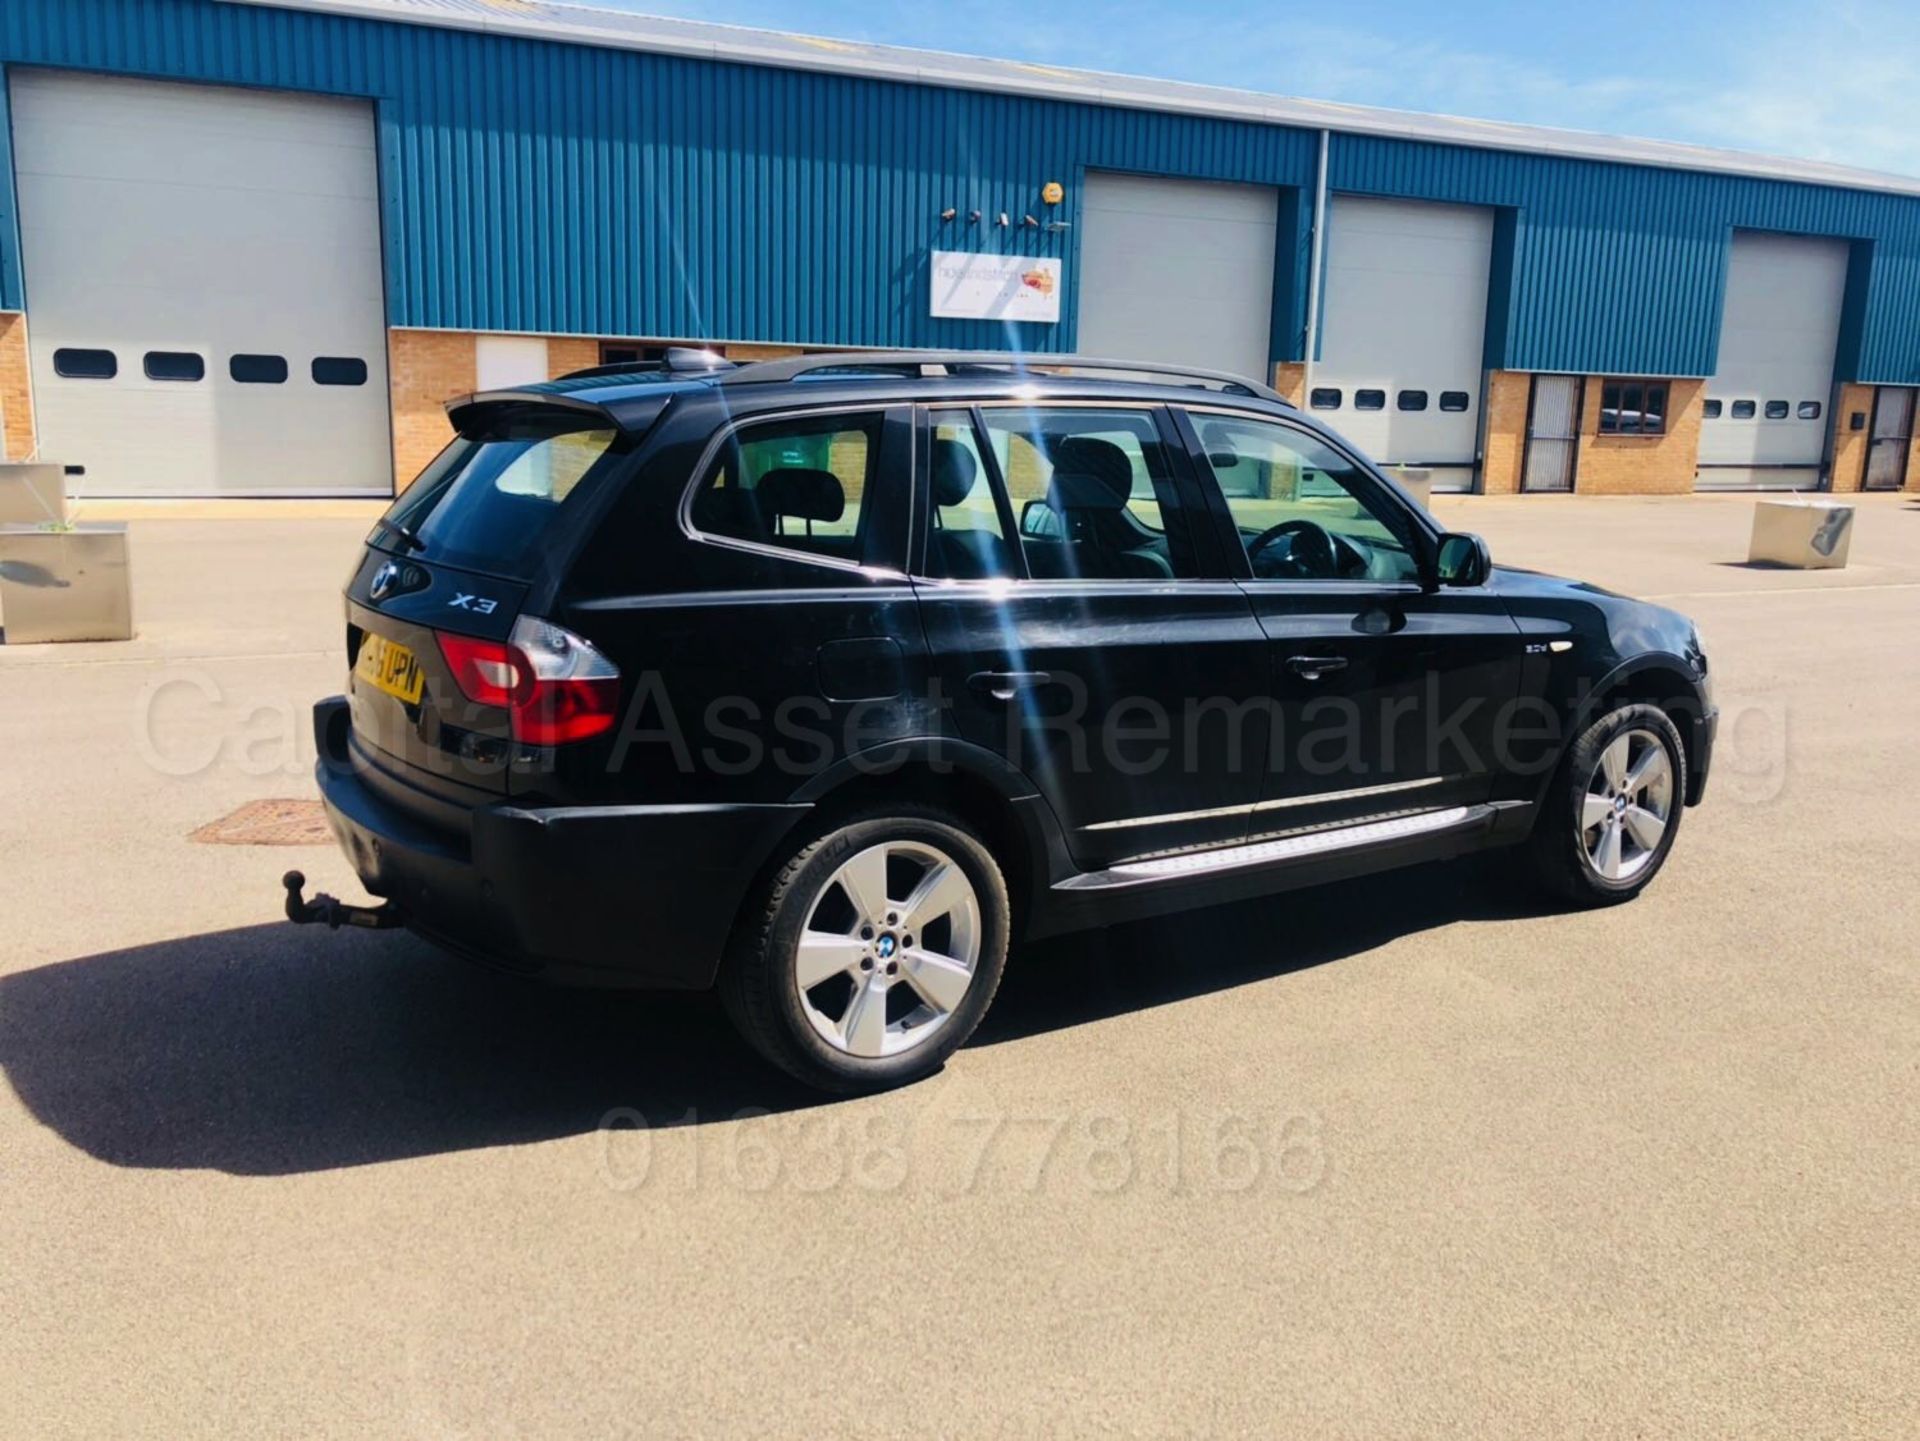 BMW X3 *SPORT EDITION* (2006) '3.0 DIESEL - 218 BHP - AUTOMATIC' *LEATHER / AIR CON* (NO VAT) - Image 10 of 29